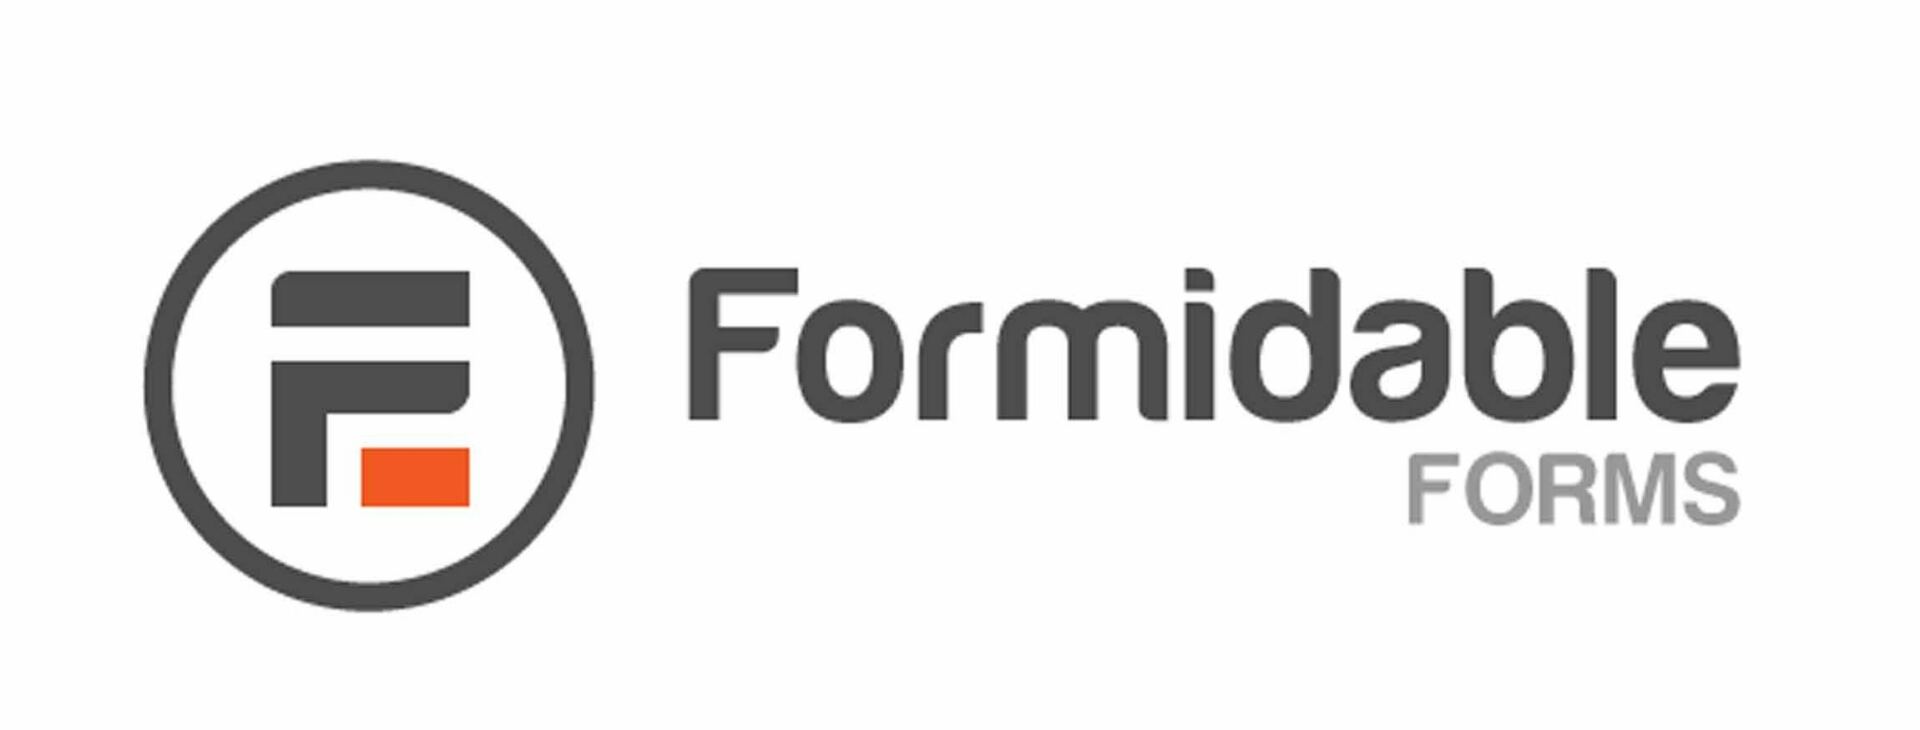 Formidable forms logo